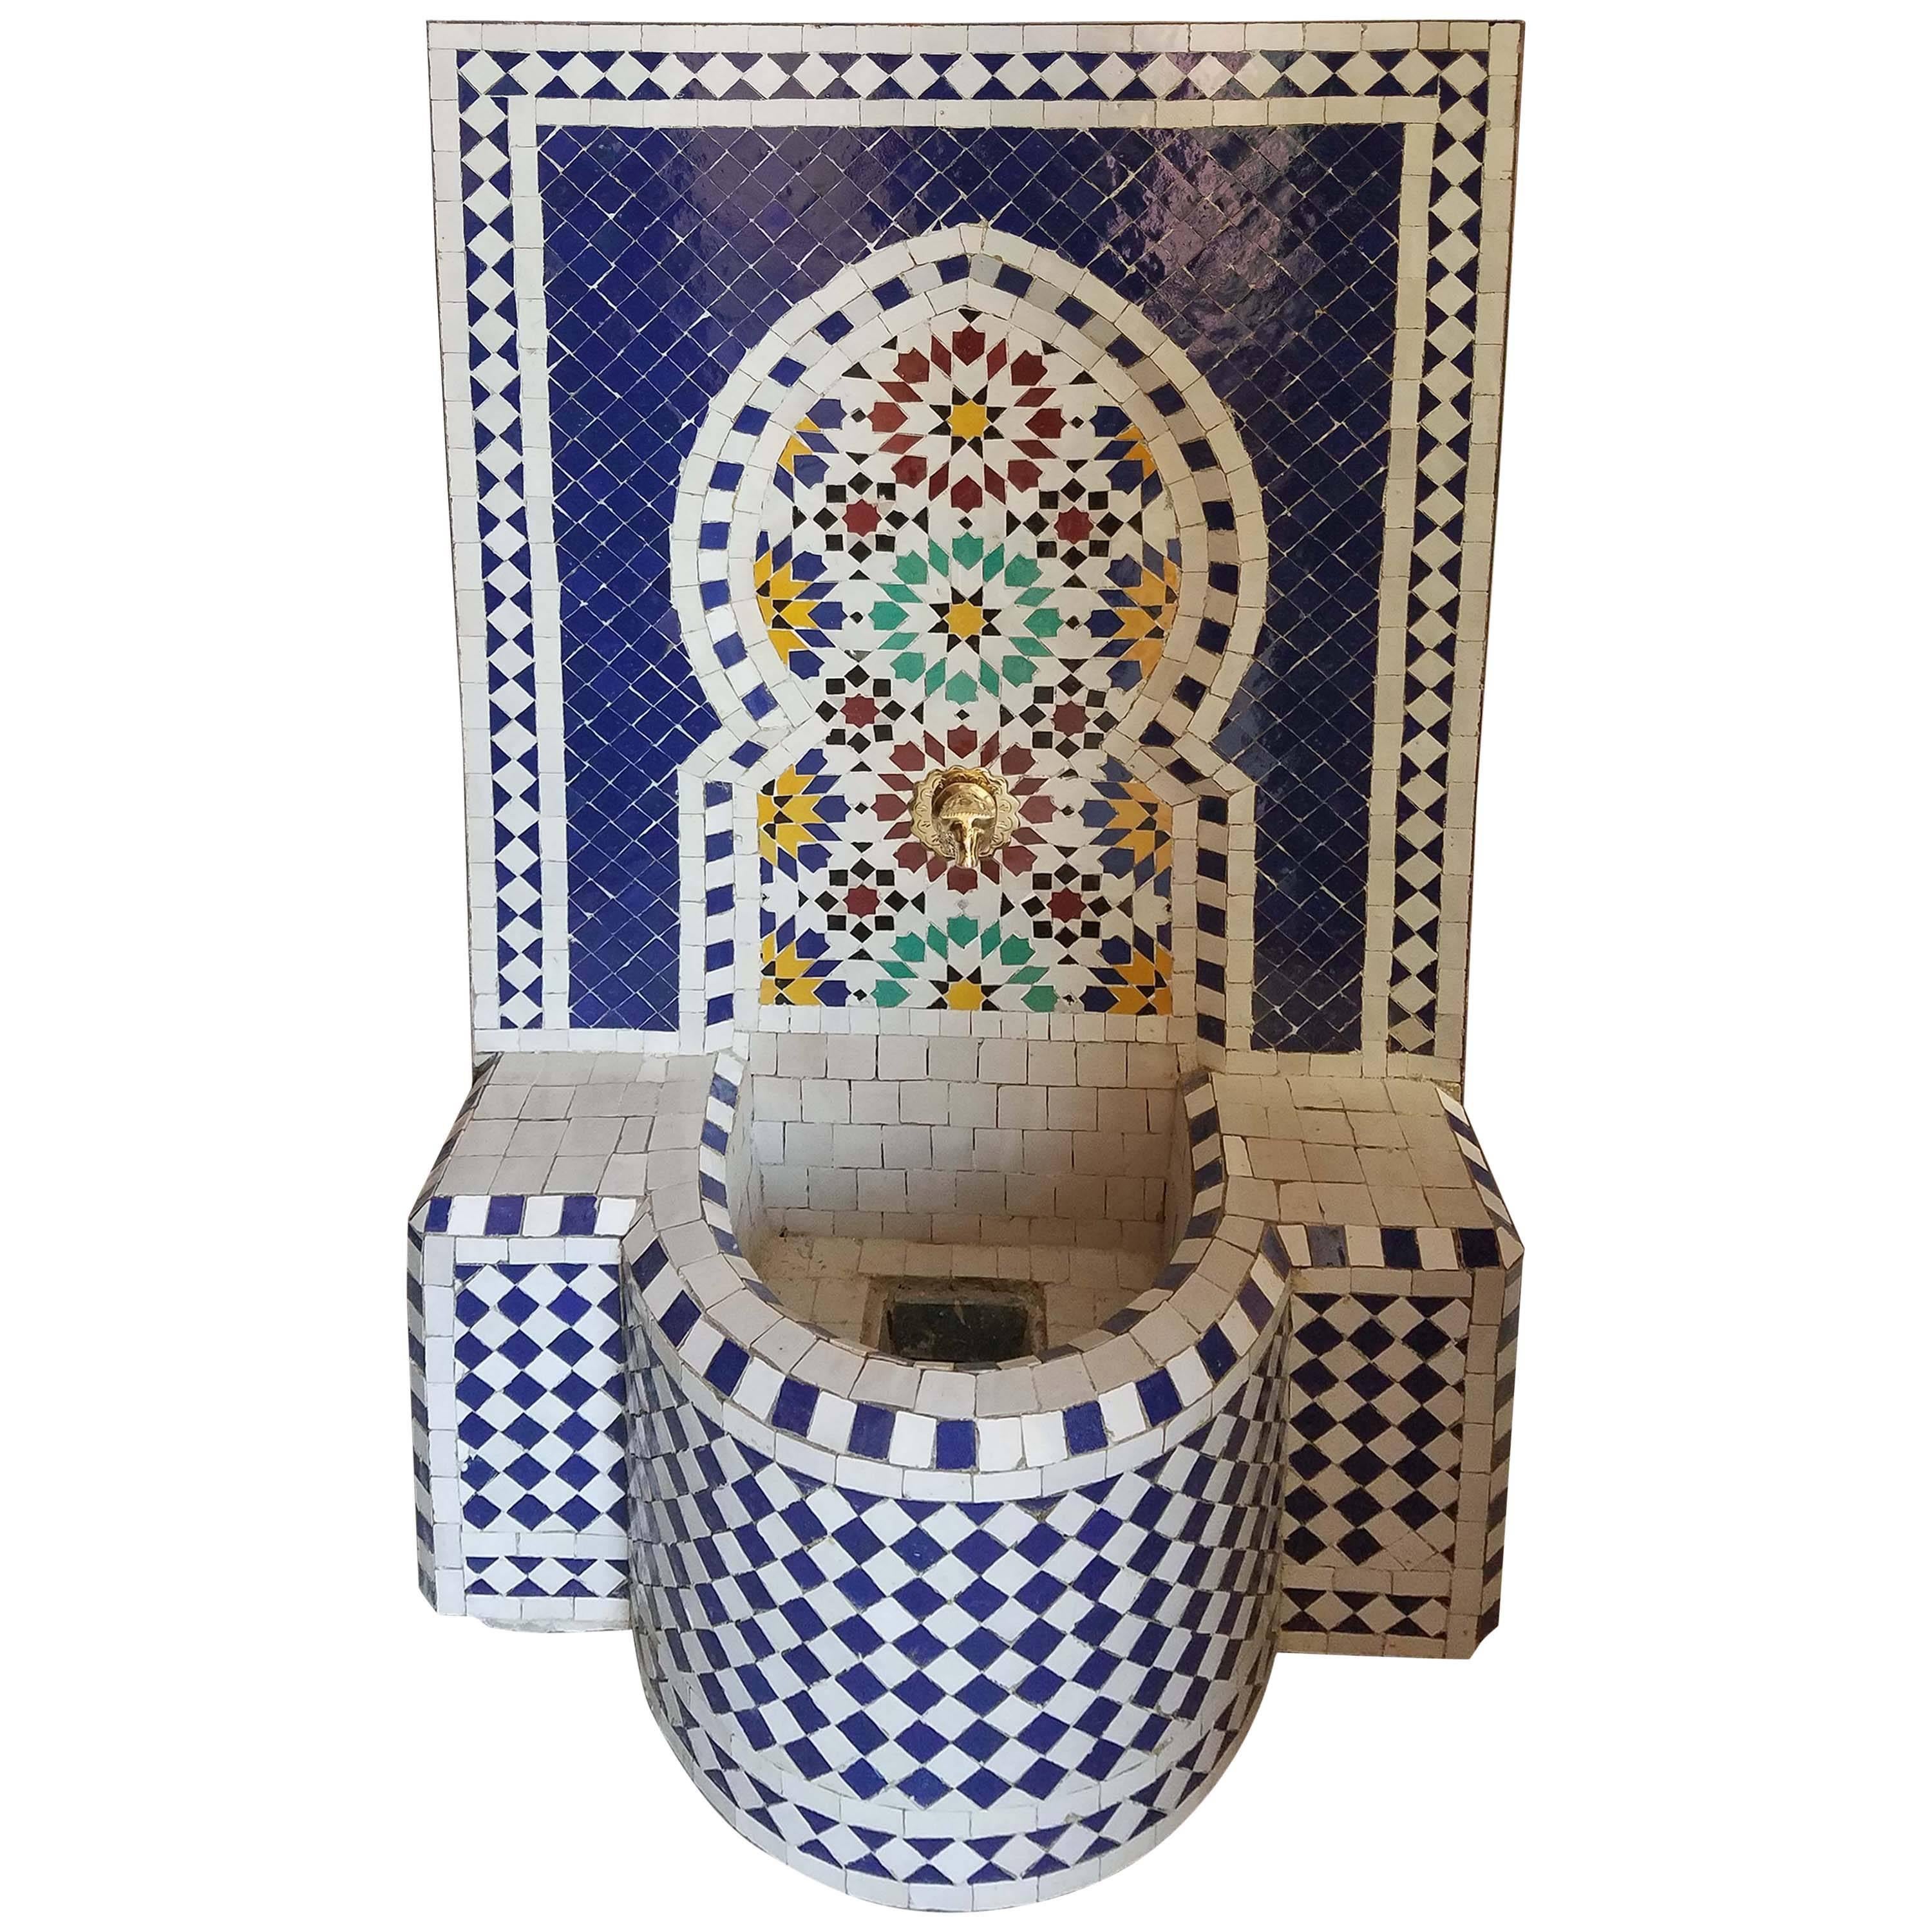 Cobalt Blue or Multi-Color Moroccan Mosaic Fountain, Garden and Indoor For Sale